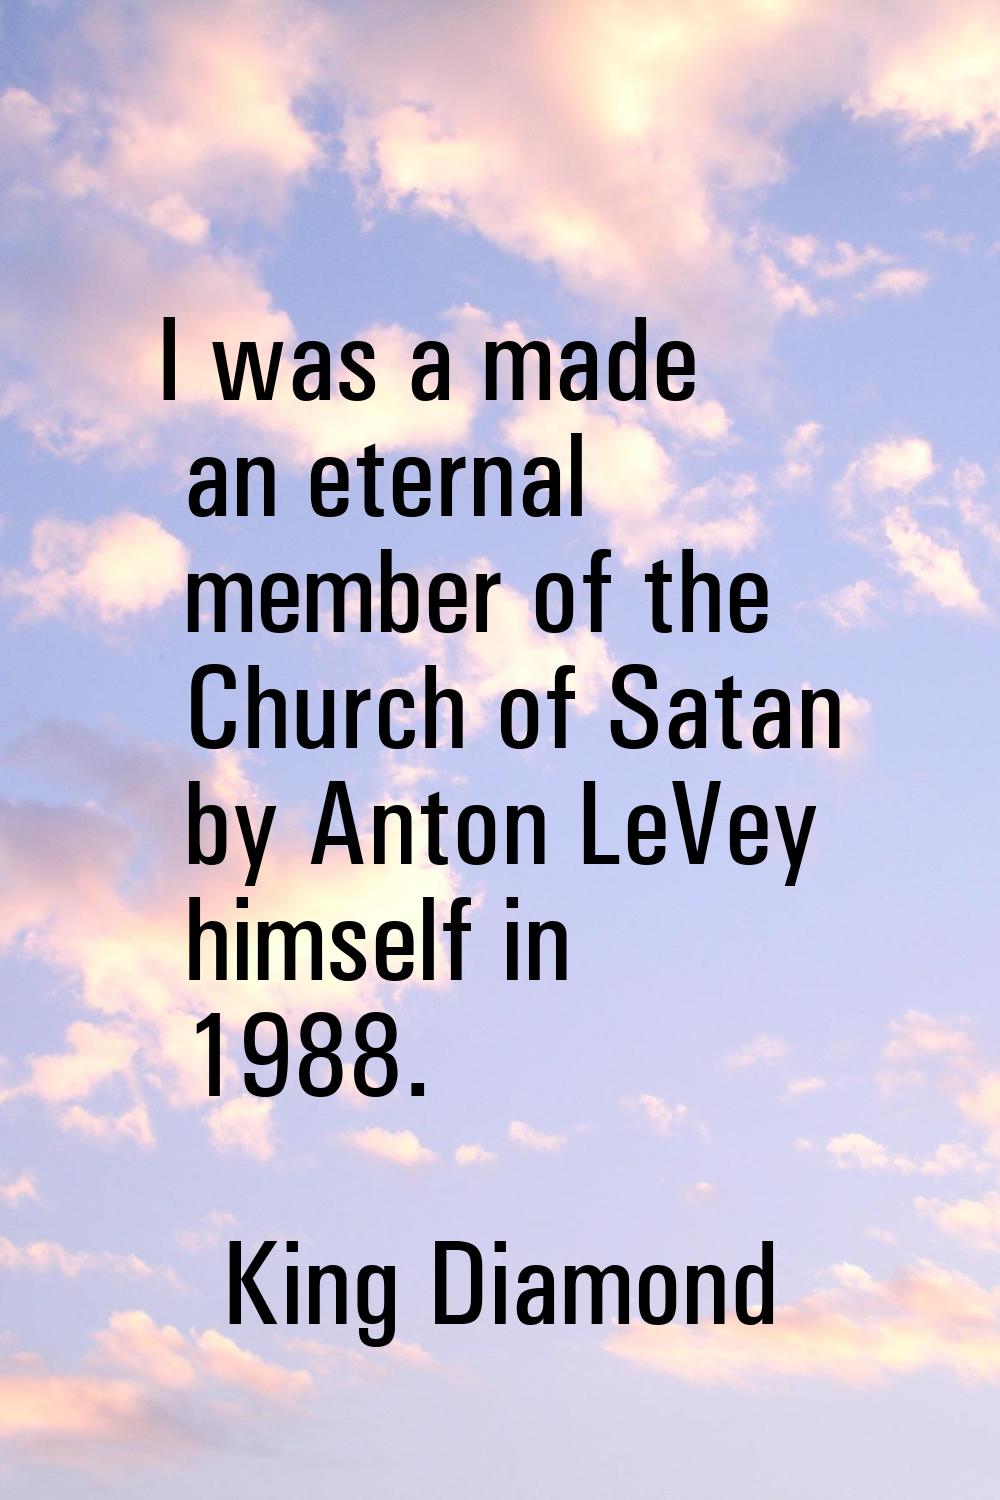 I was a made an eternal member of the Church of Satan by Anton LeVey himself in 1988.